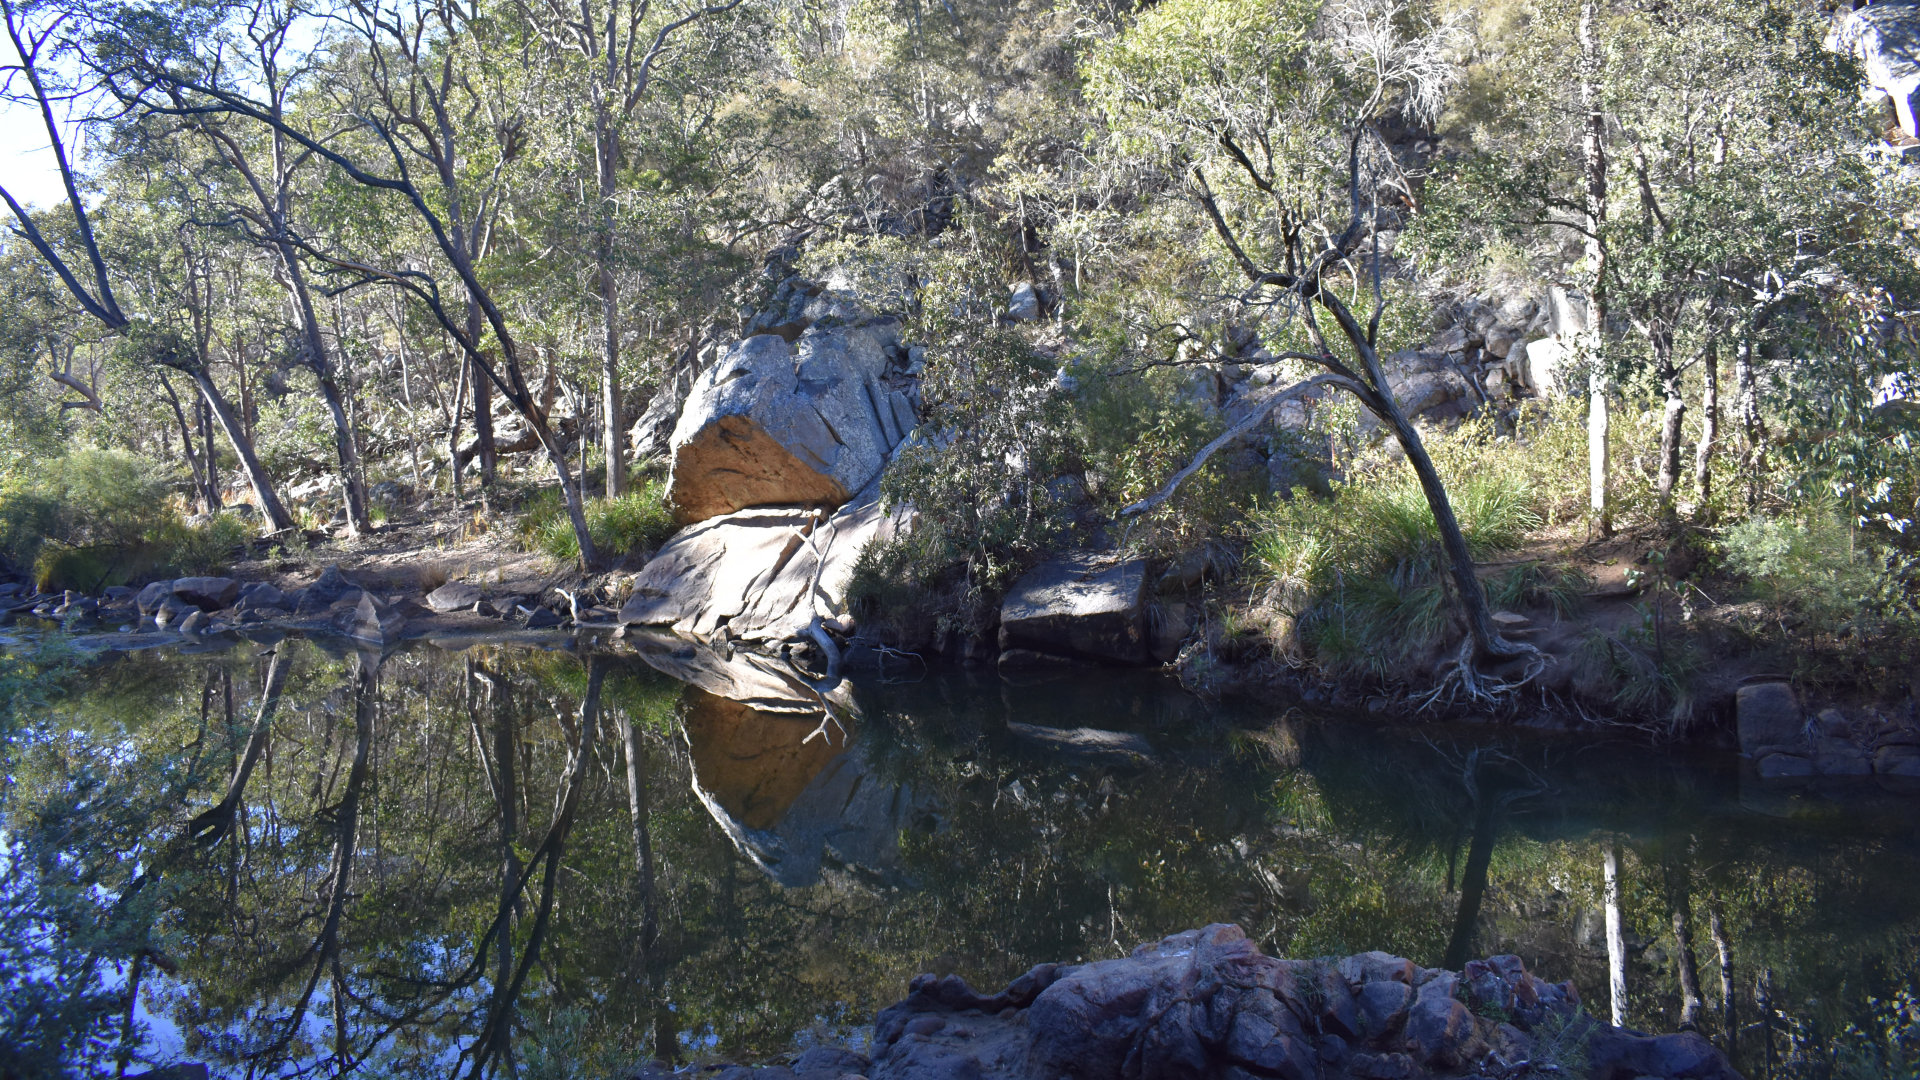 Bottlebrush Pool, at Crows Nest National Park north of Toowoomba. The national park has a day use picnic area and walking track to Crows Nest Falls Lookout, Koonin Lookout, Bottlebrush Pool, Kauyoo Pool, and The Cascades on Crows Nest Creek